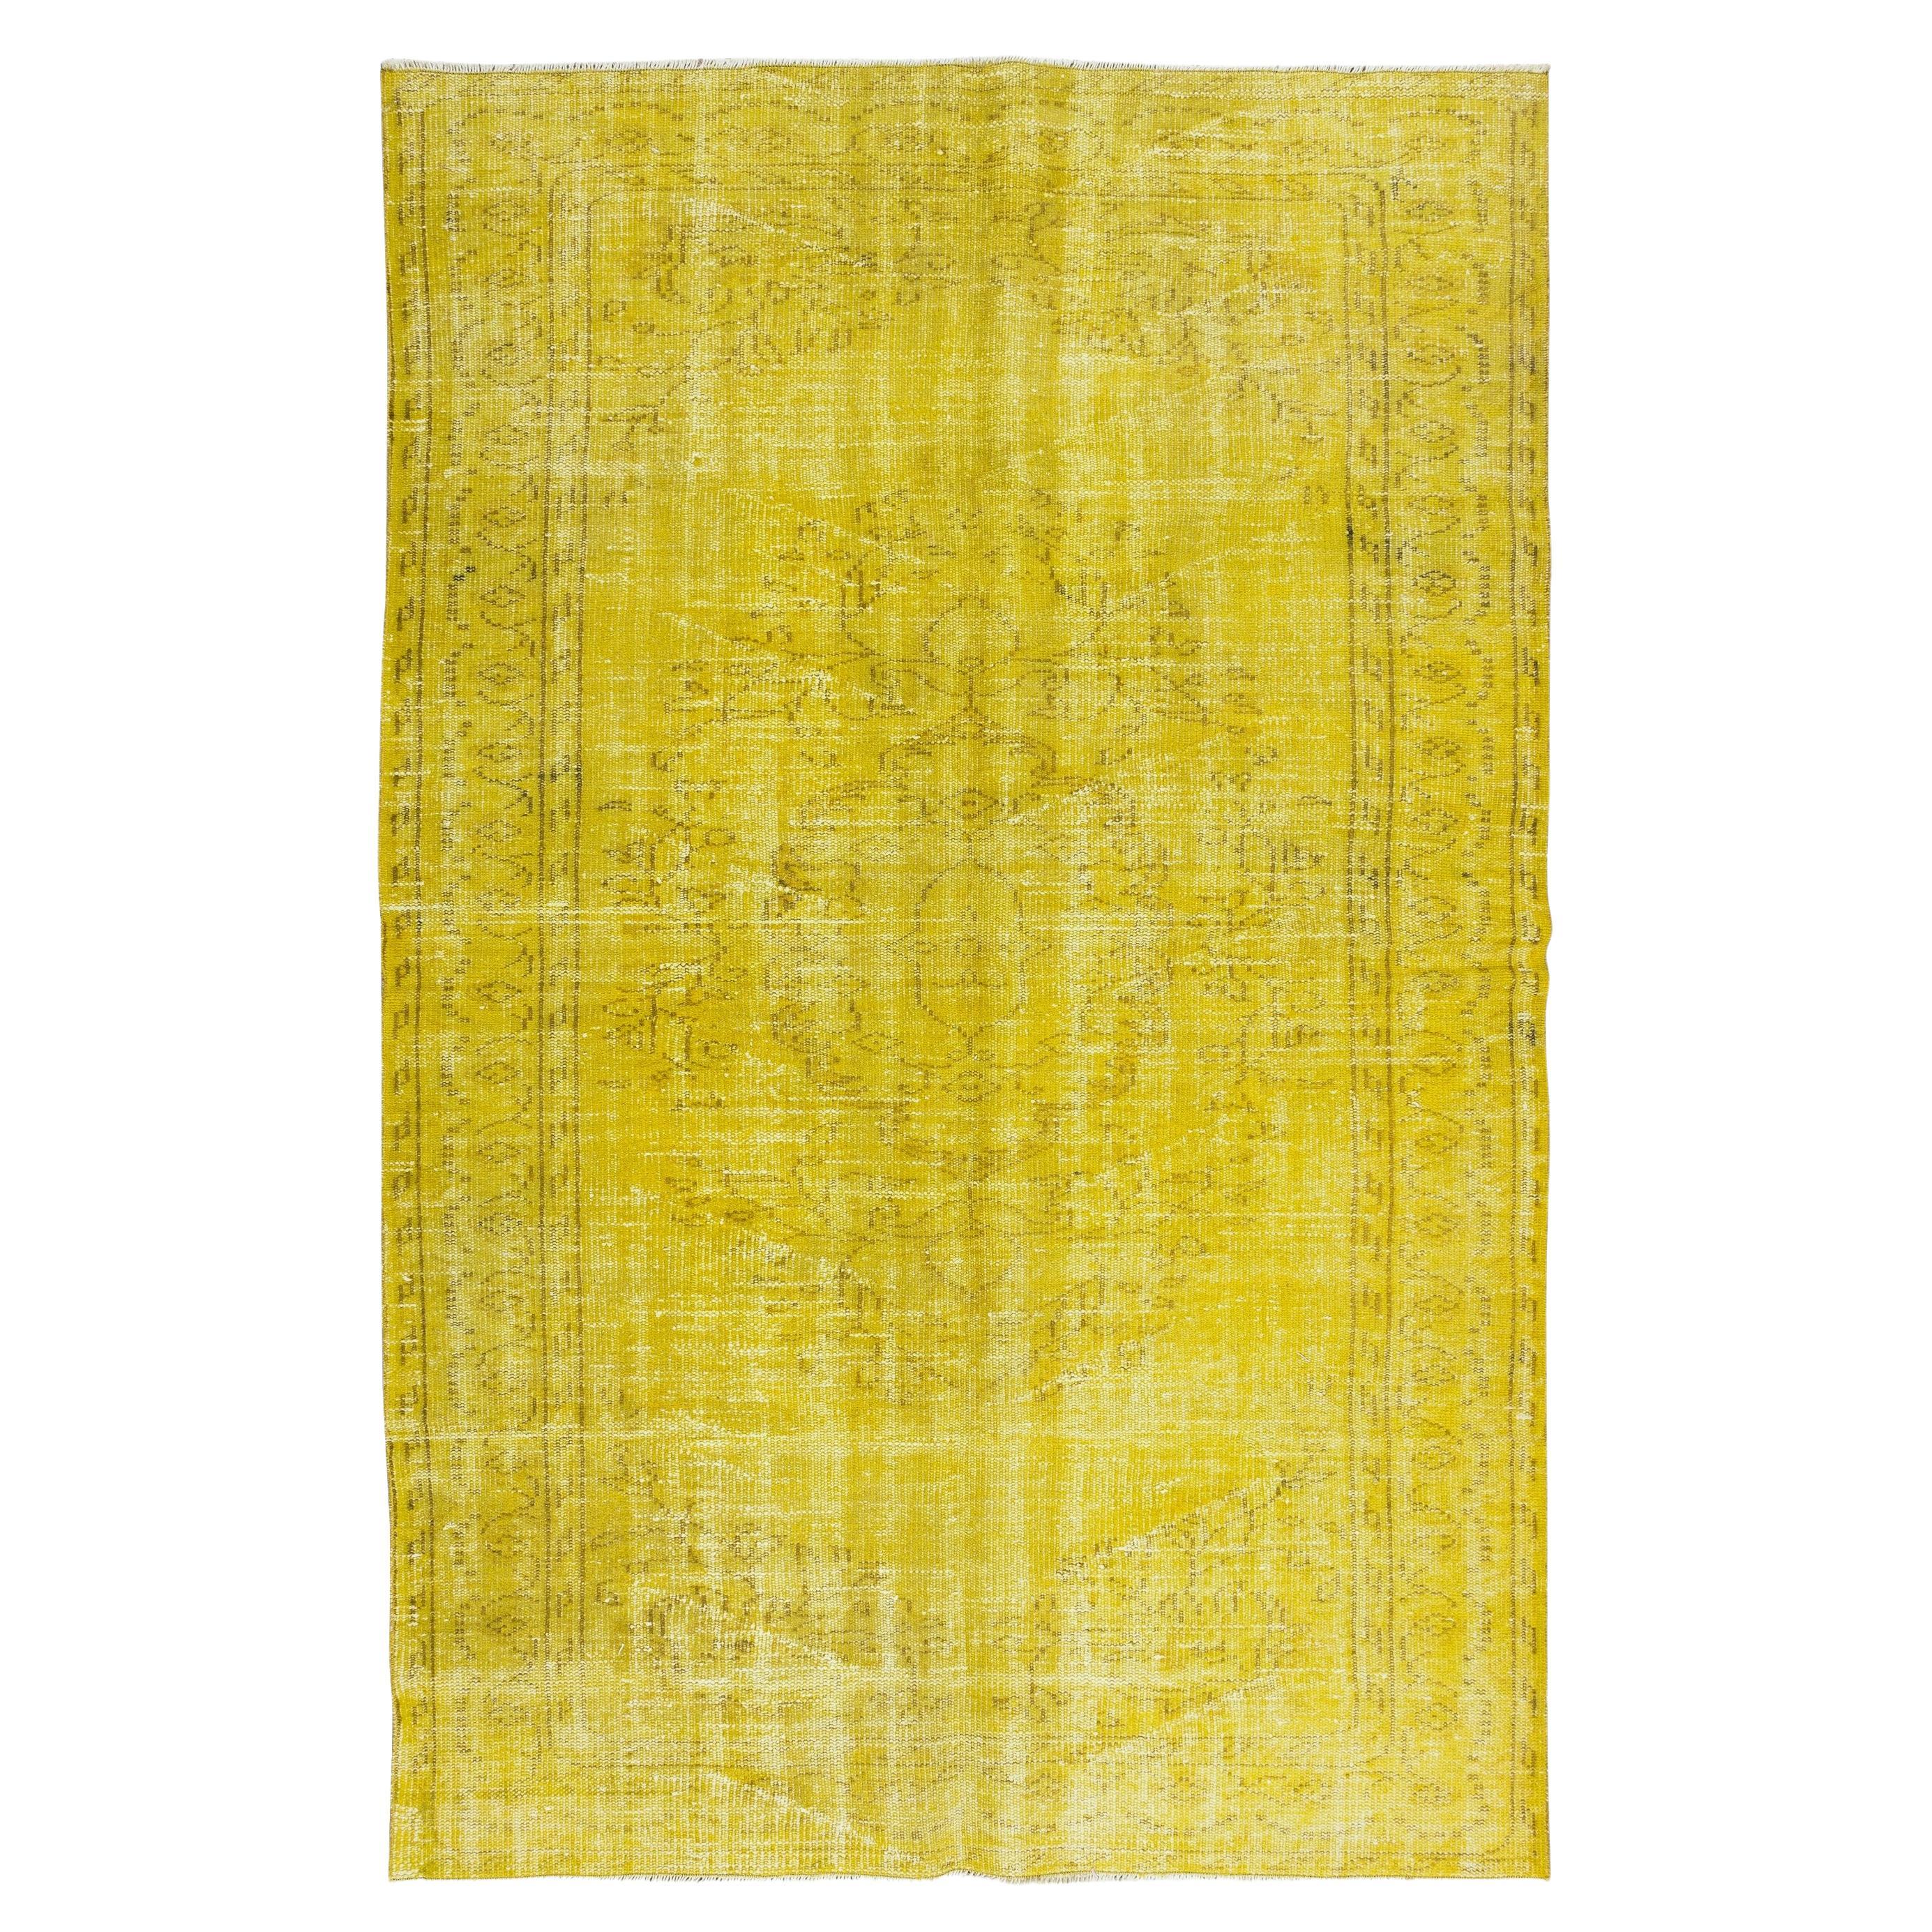 5.6x9.5 Ft Yellow Area Rug for Modern Home & Office, Turkish Handmade Carpet For Sale